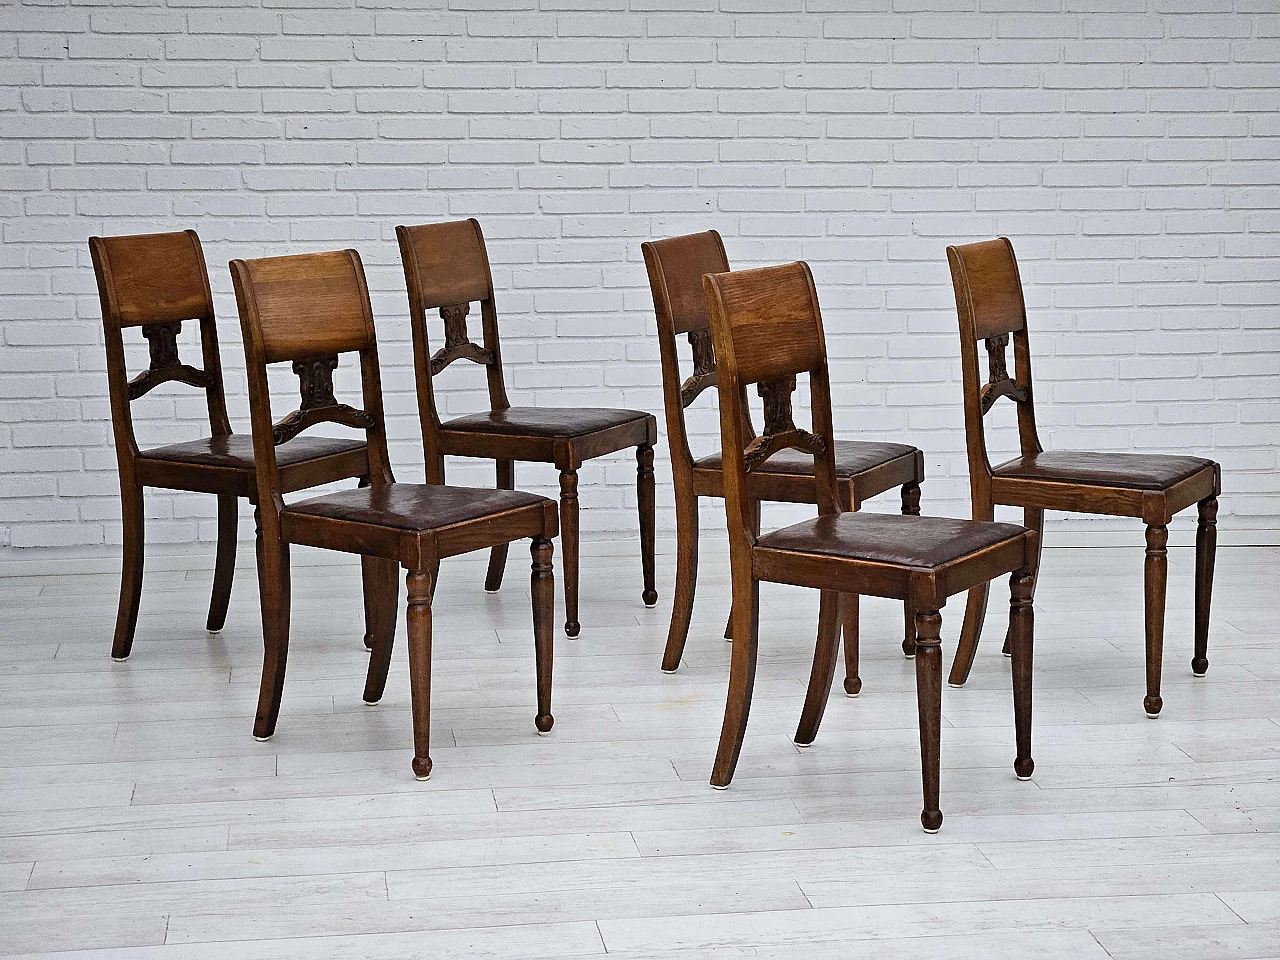 6 Scandinavian oak and leather chairs, 1930s 1